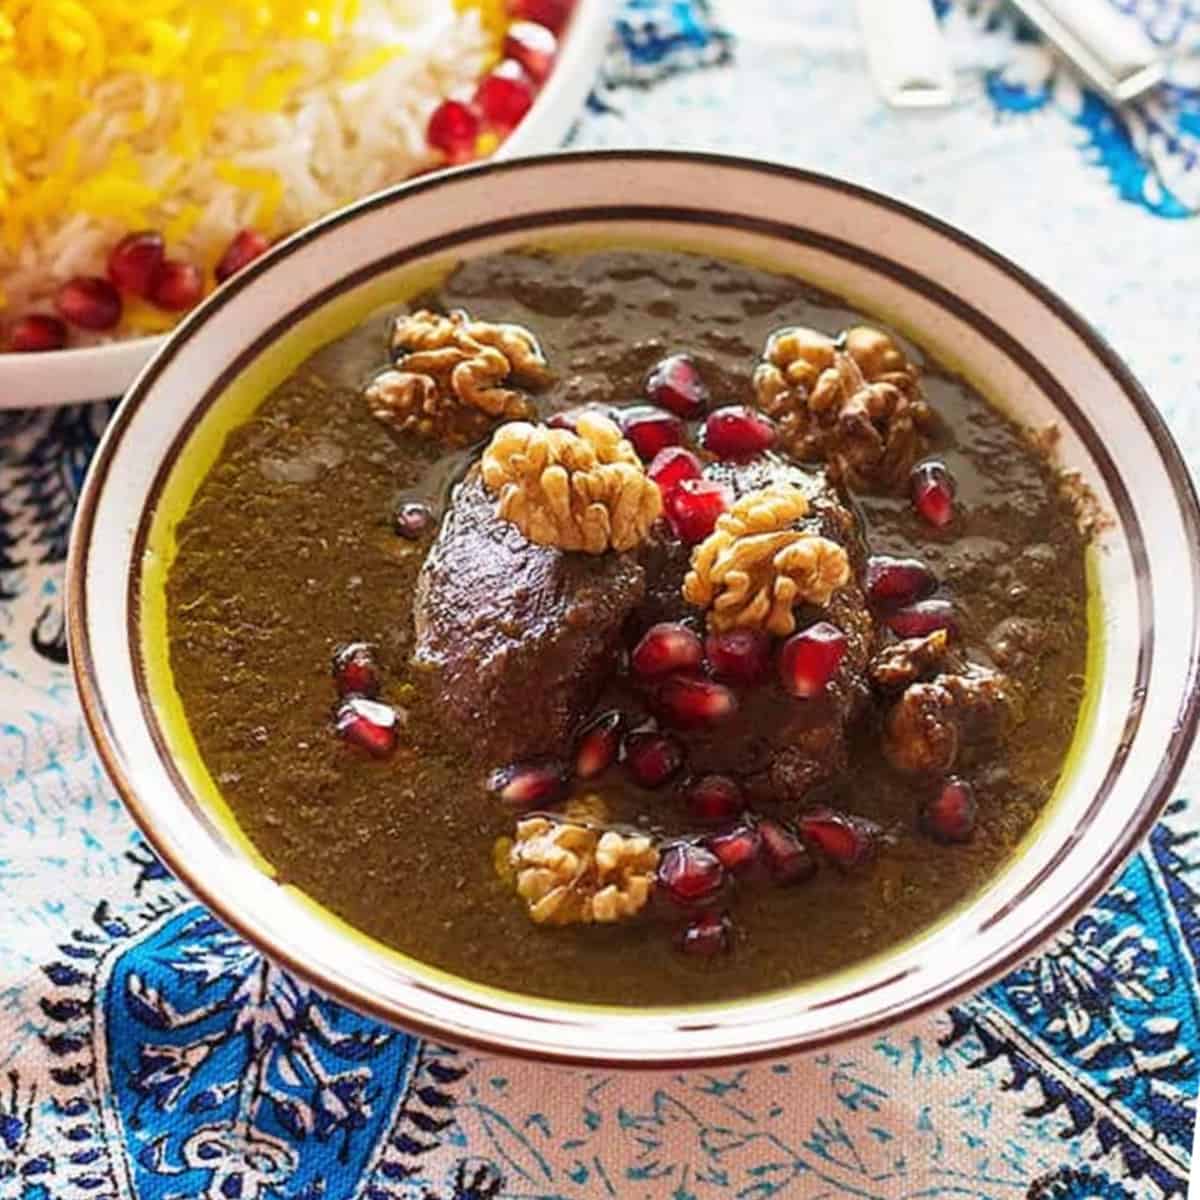 Fesenjan is a traditional Persian pomegranate and walnut chicken stew. It's sweet and sour with a rich nutty flavor, served over rice. The chicken is cooked in a rich walnut and pomegranate sauce until tender, making this a luscious and delicious meal.
